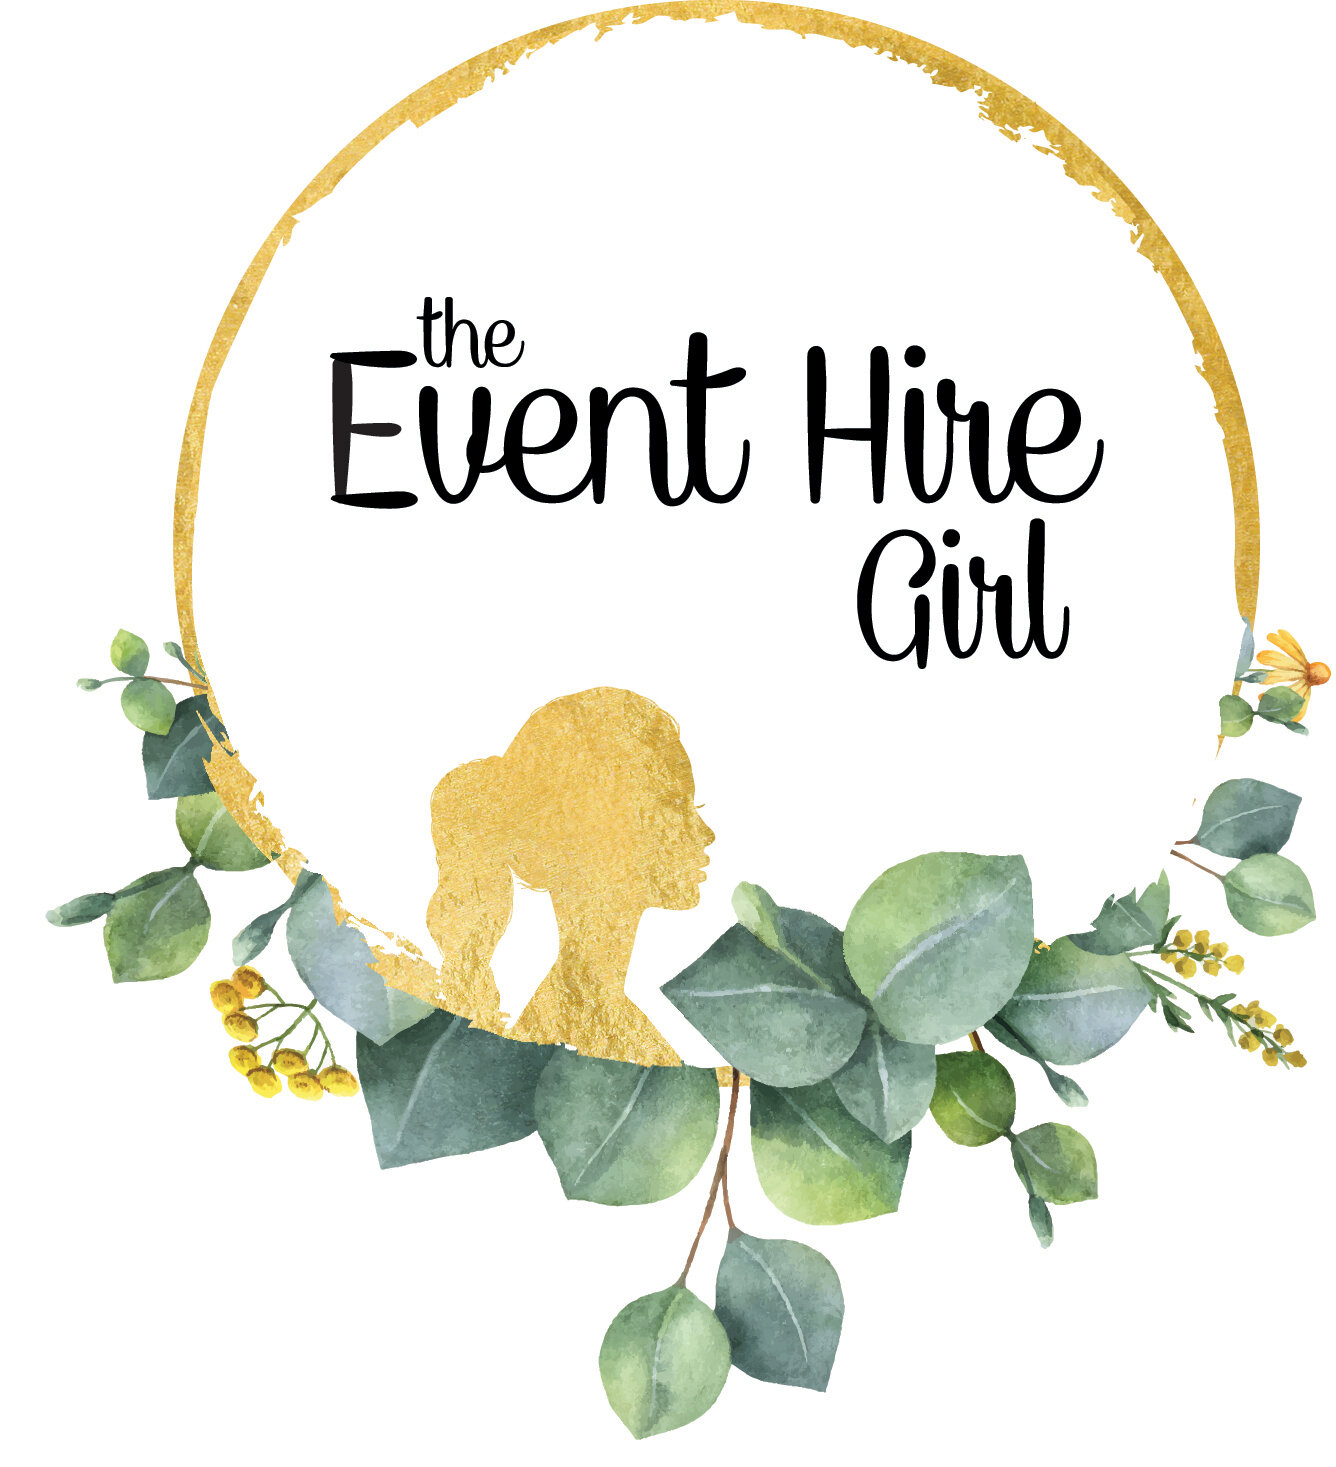 The Event Hire Girl